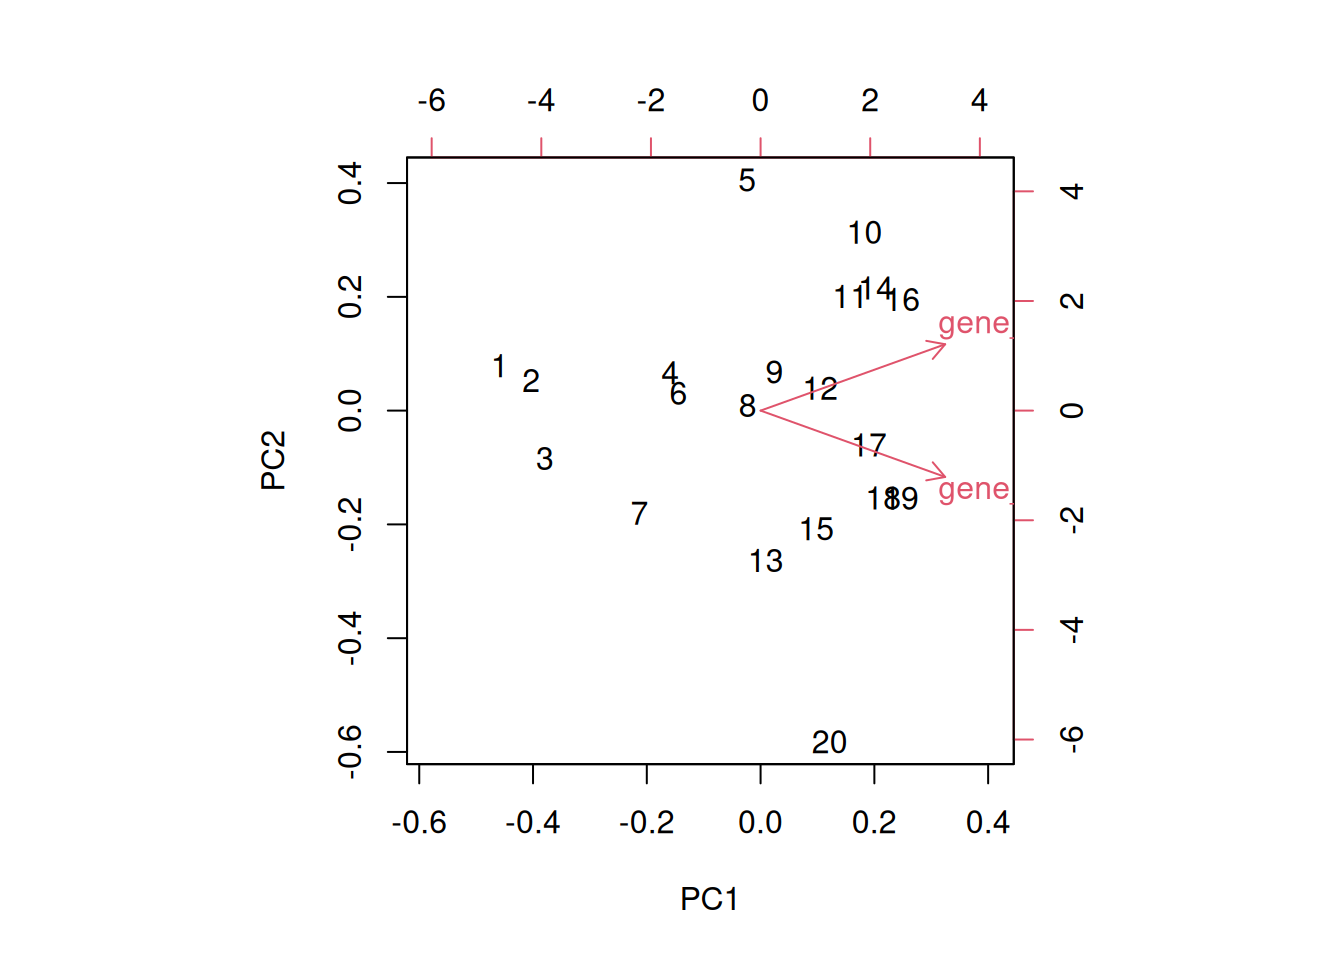 A biplot shows both the variables (arrows) and observations of the PCA analysis.